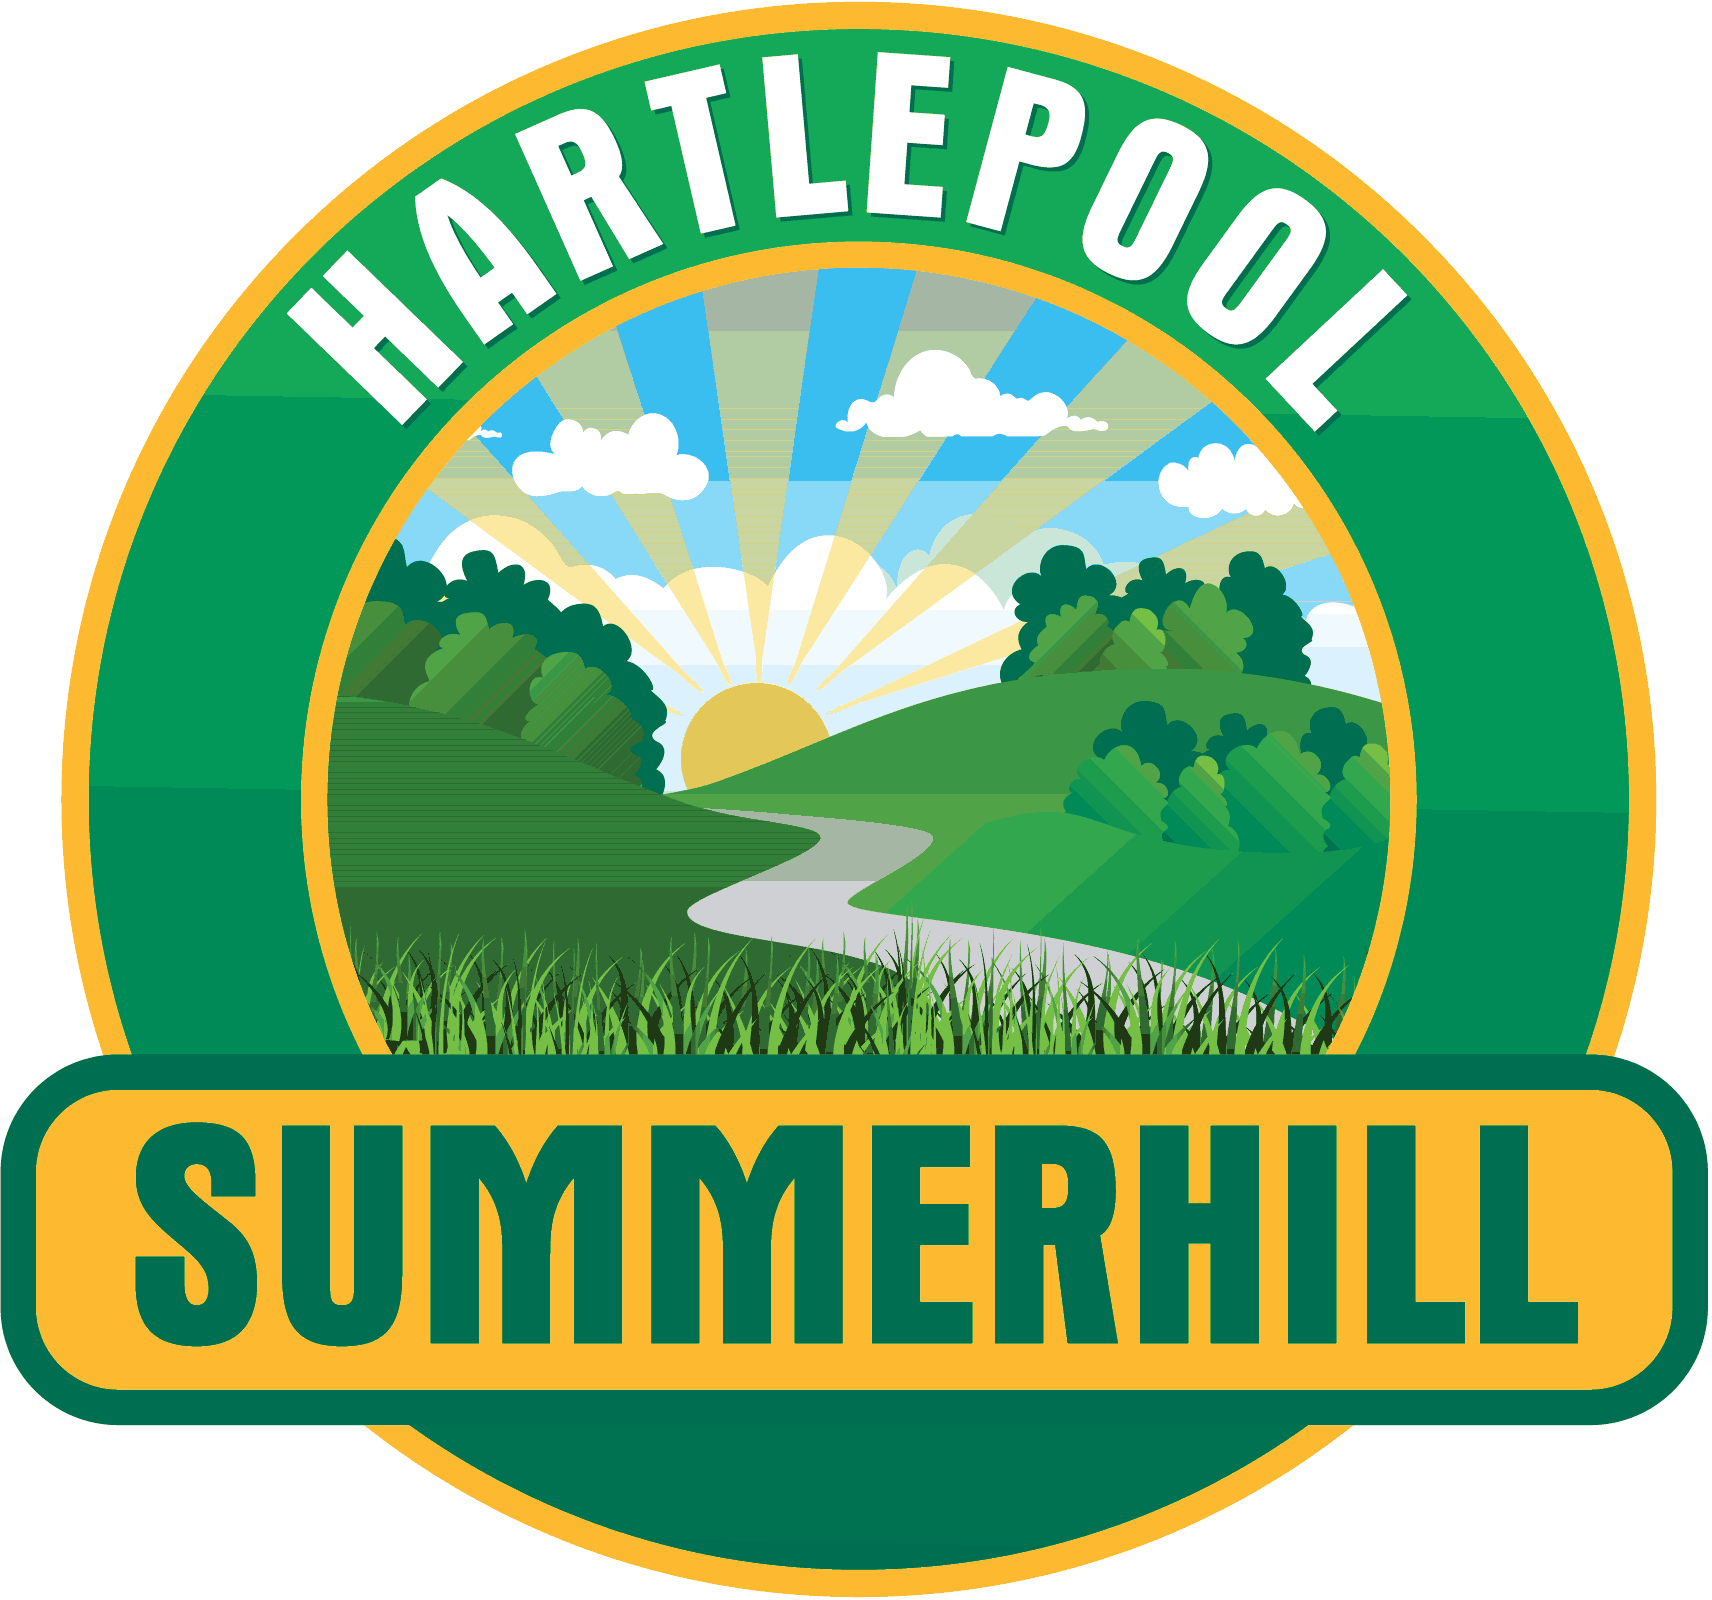 Park clipart country park. Summerhill get hartlepool active